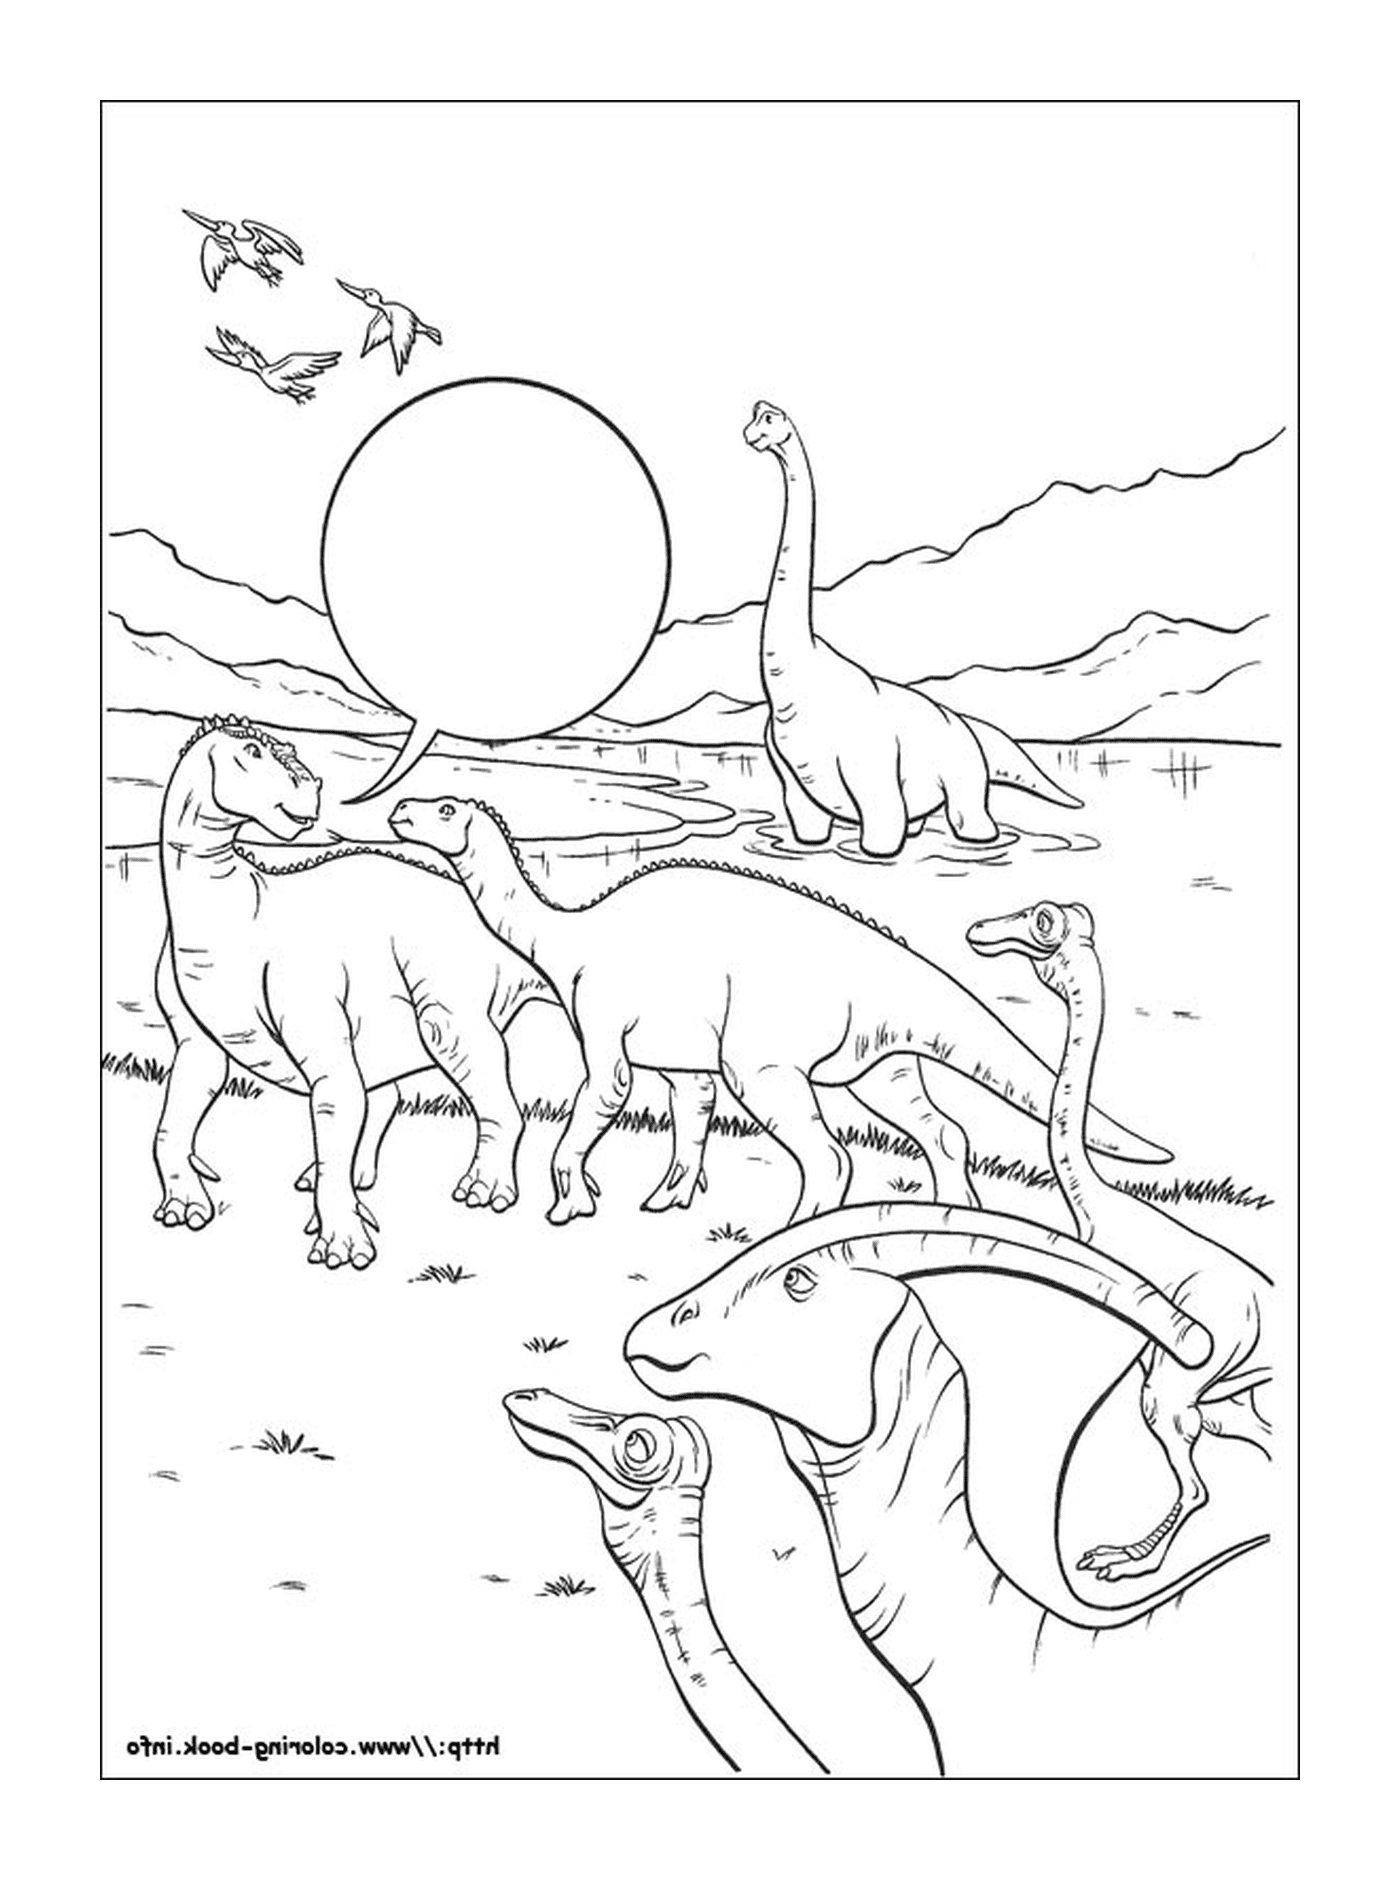  Many dinosaurs visible in this image 